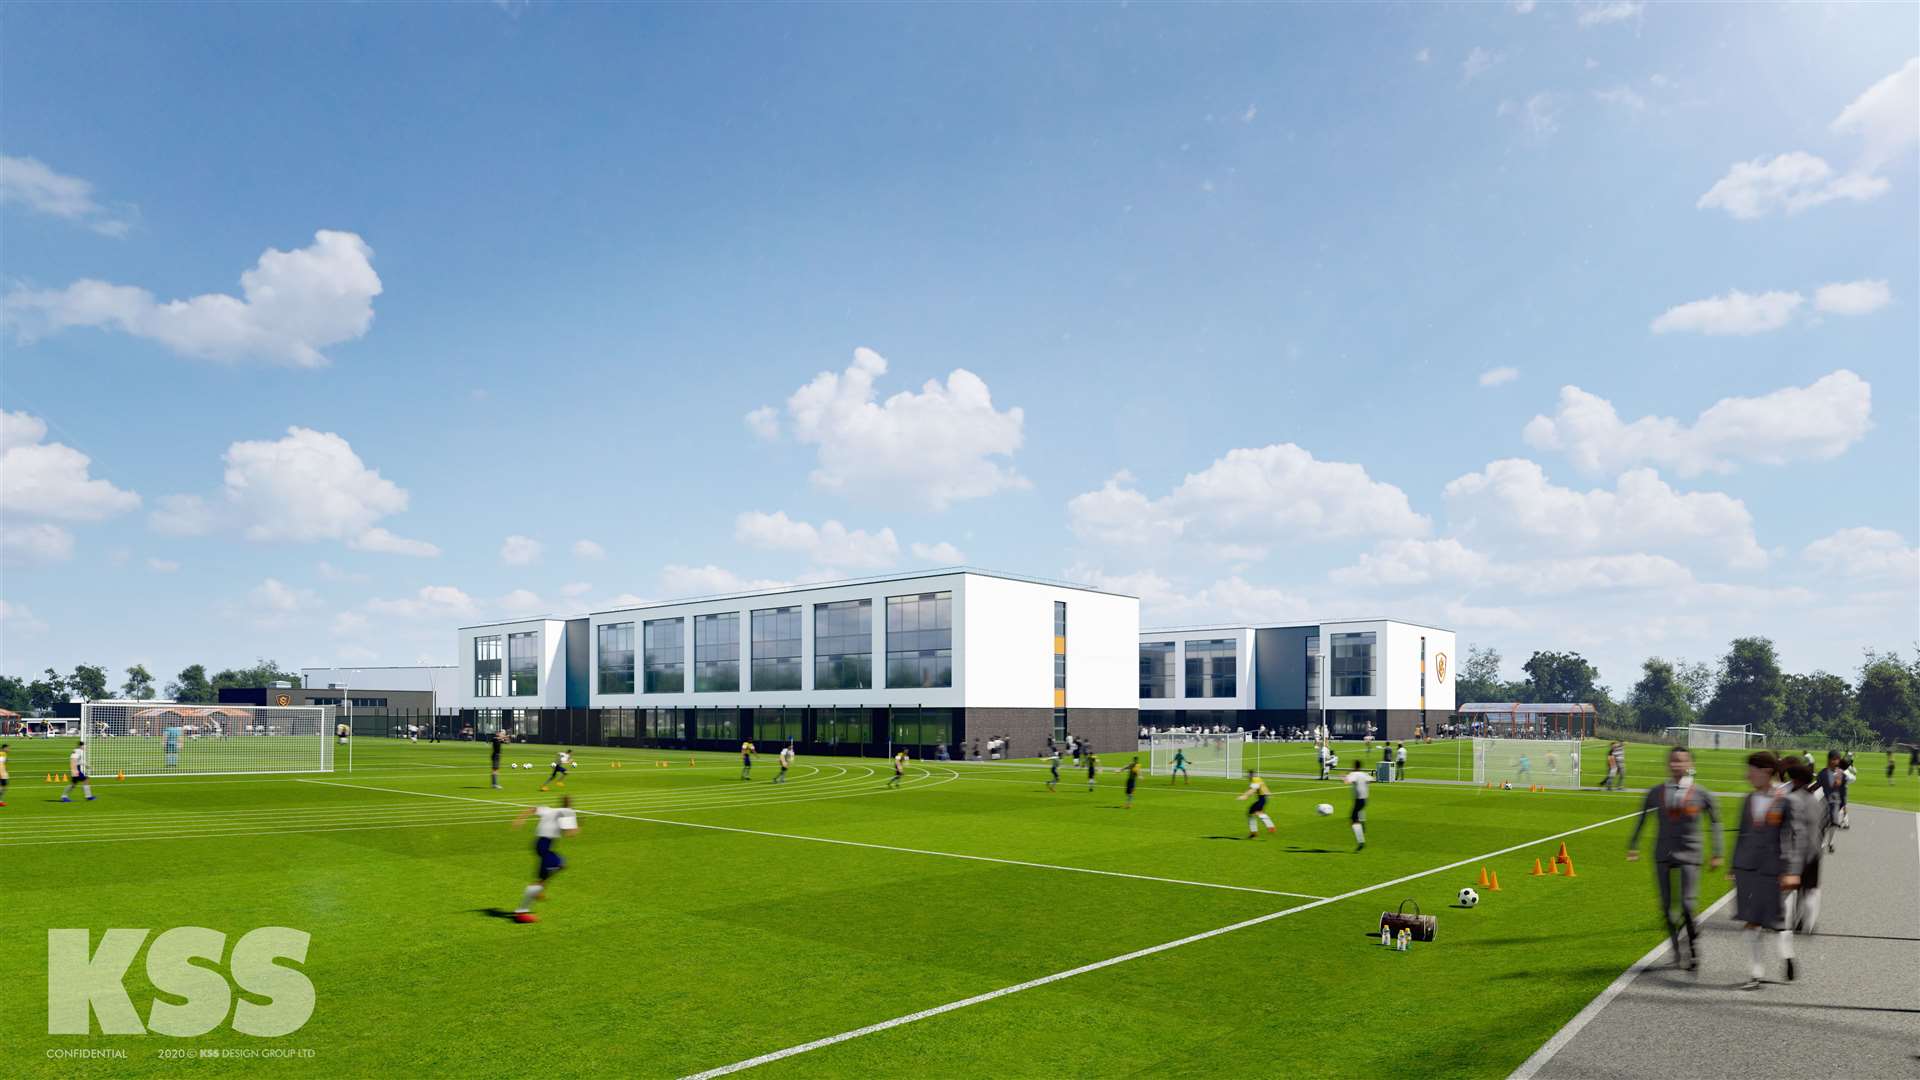 Stone Lodge Secondary School will include new sports pitches.